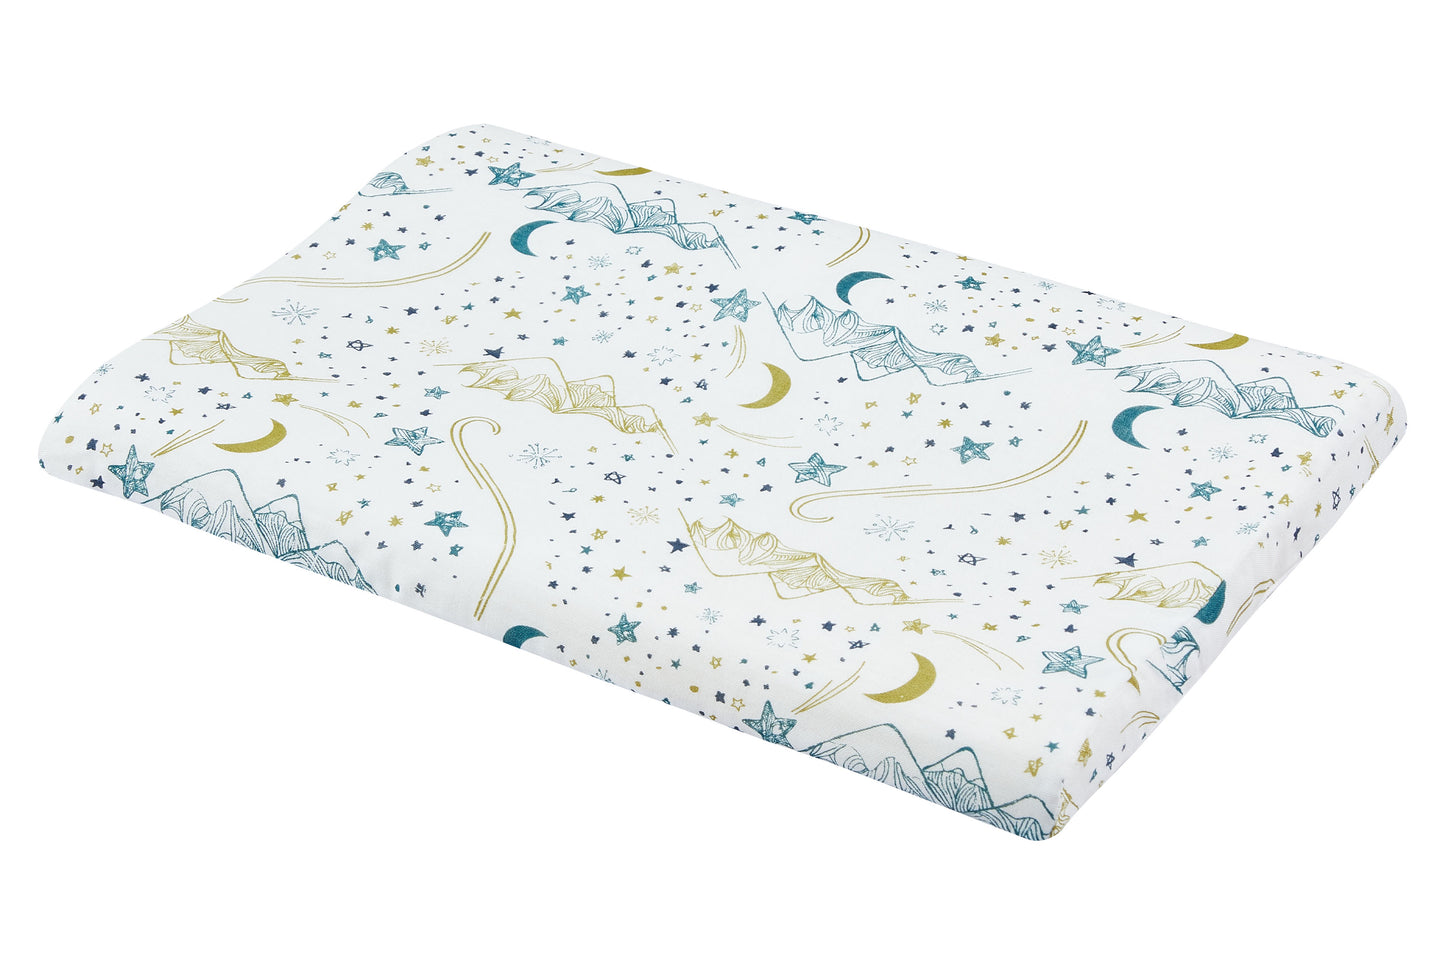 Bamboo Toddler Pillow with Pillowcase (Small) - Stars White - Nest Designs